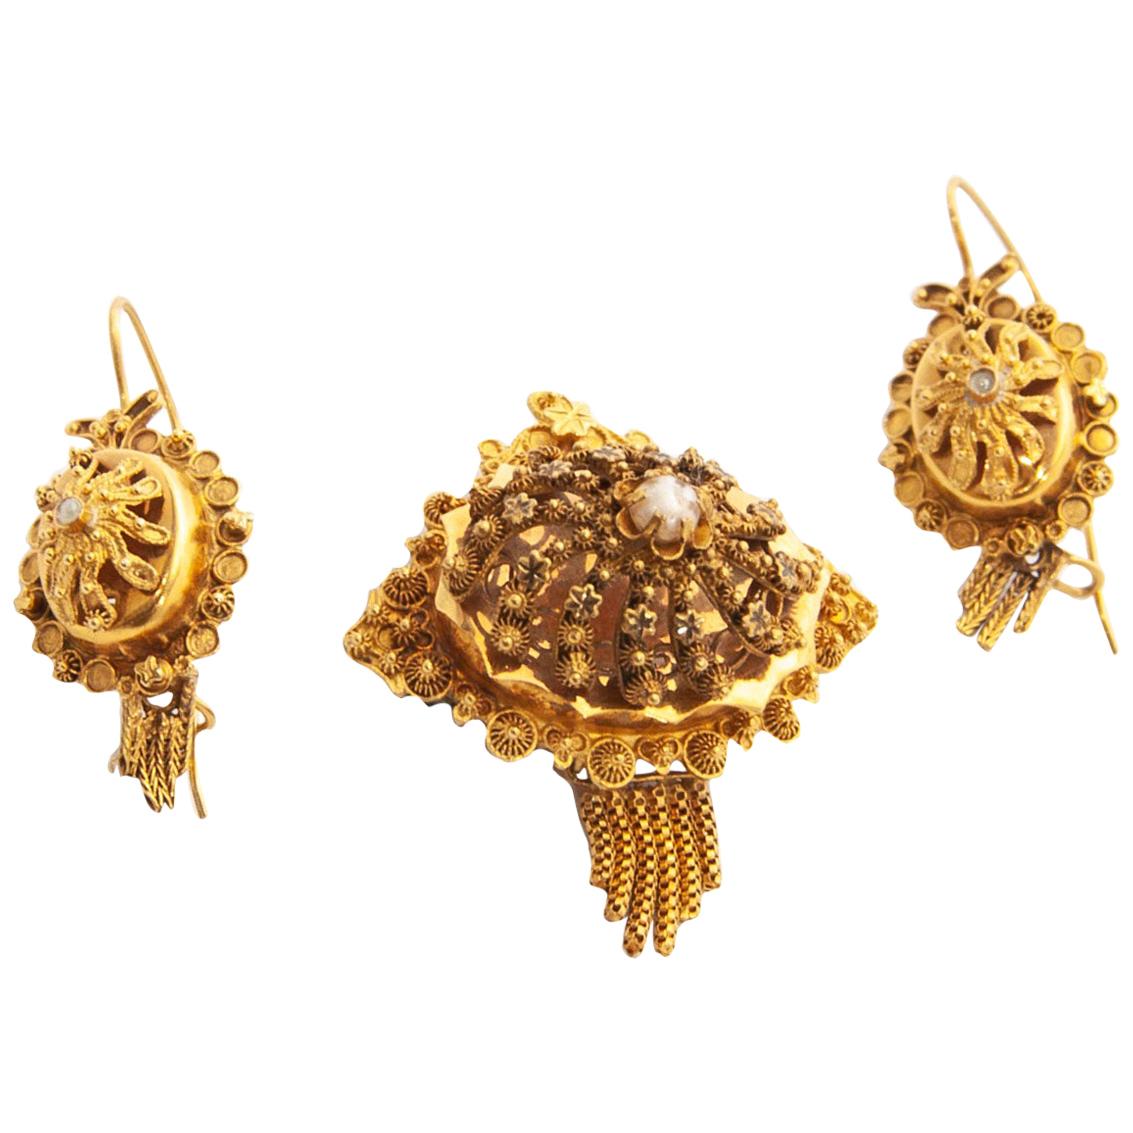 Antique 14K Gold Tassel Earrings and Brooch, Jewelry Set For Sale